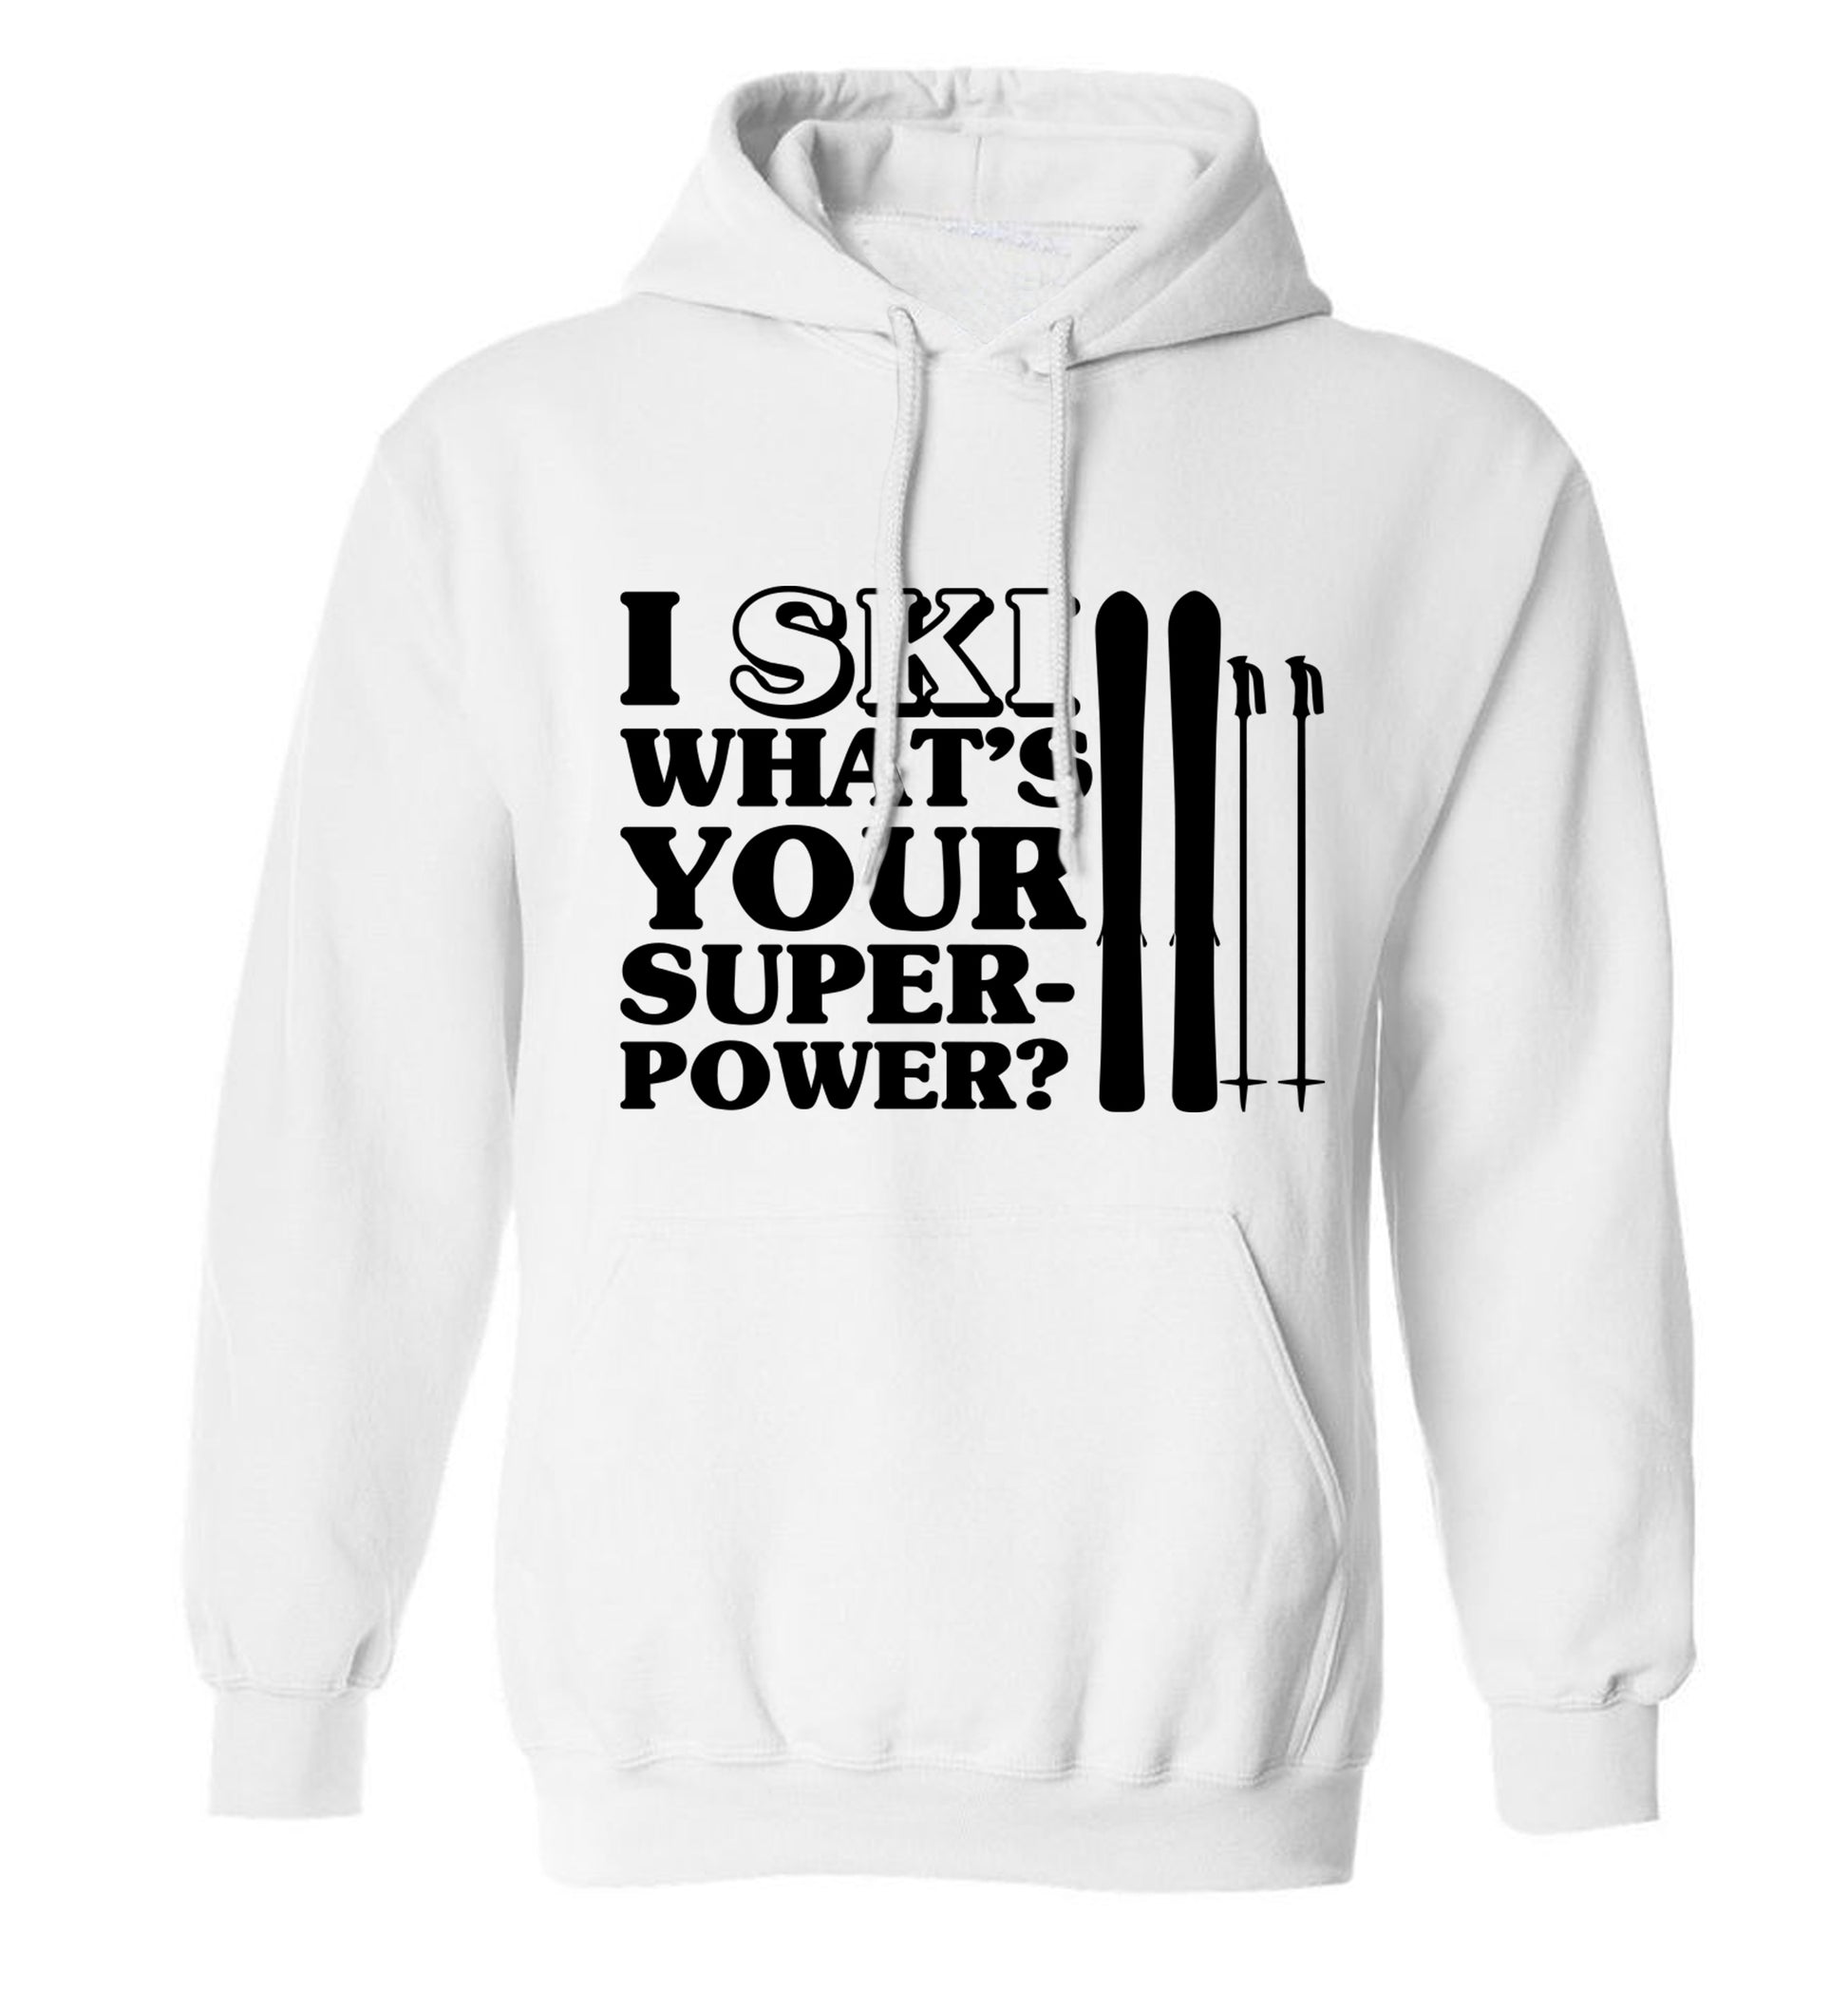 I ski what's your superpower? adults unisexwhite hoodie 2XL